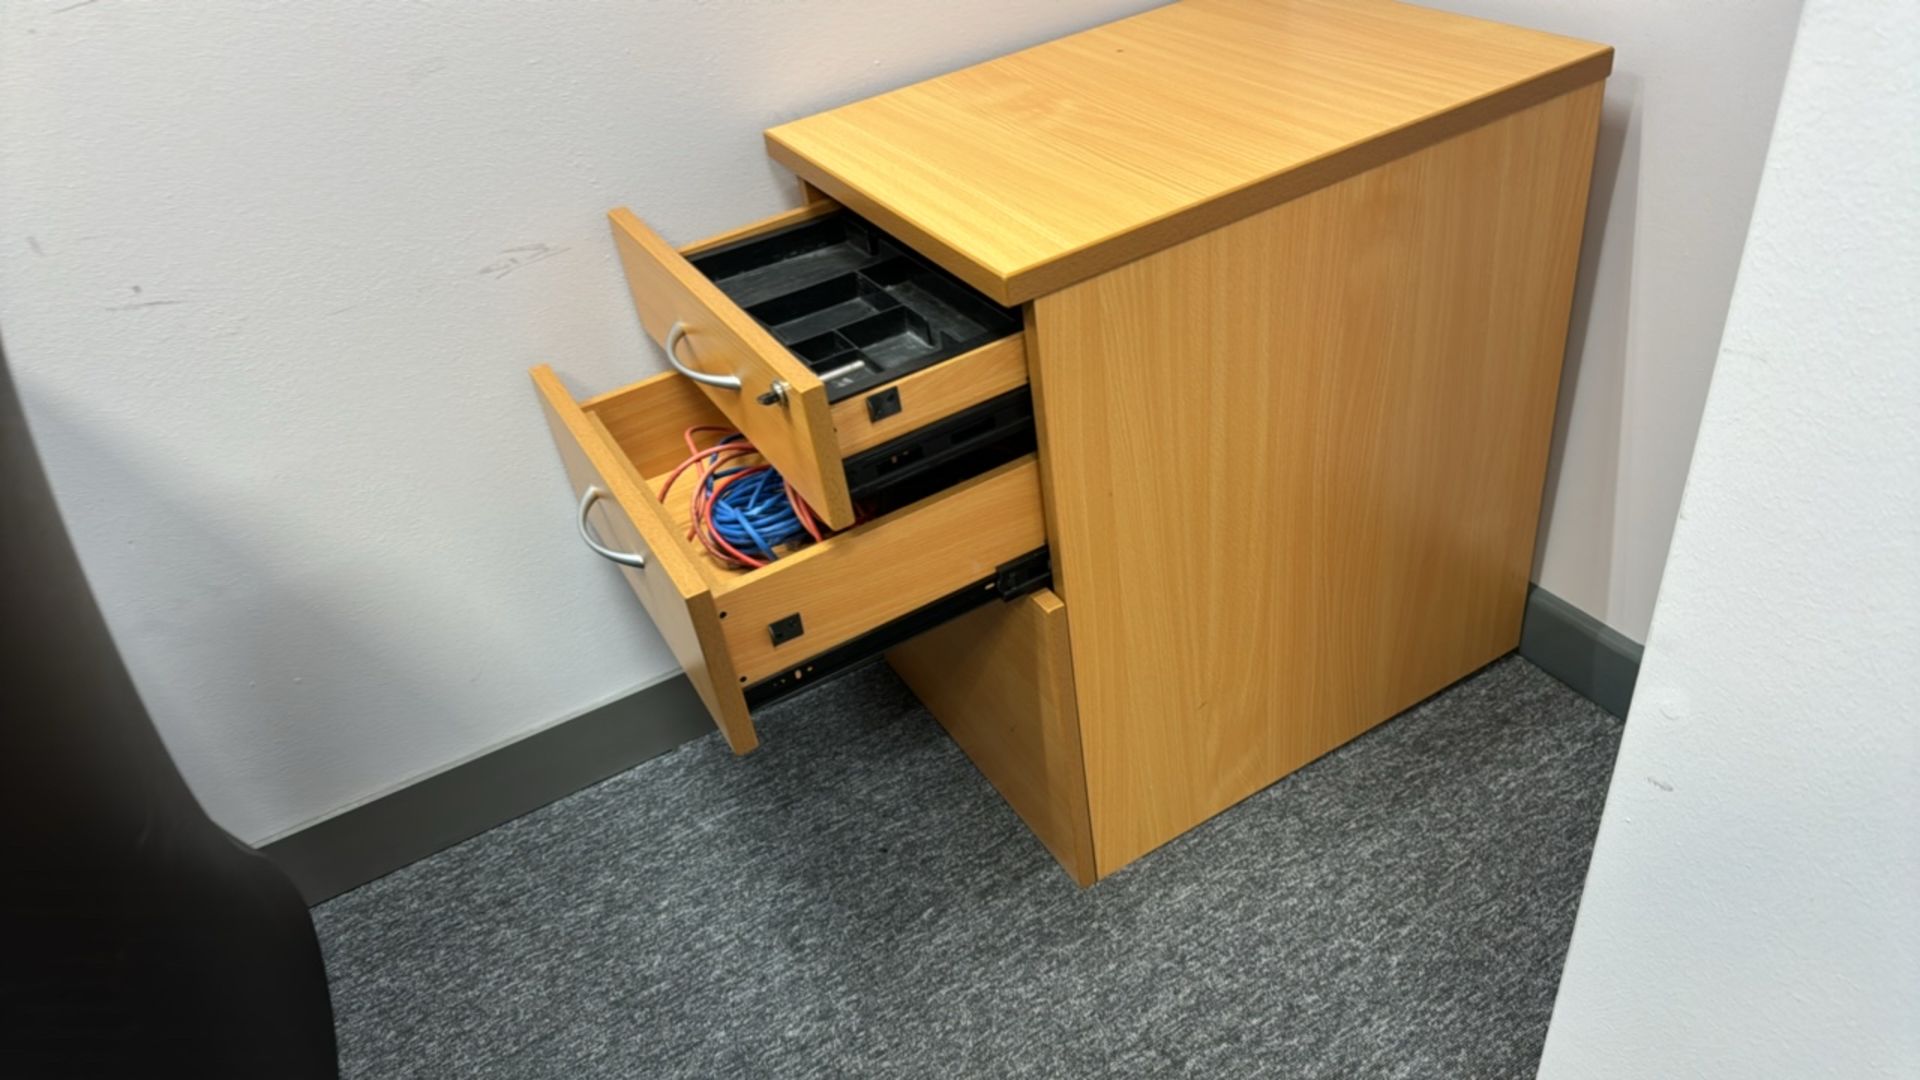 ref 240 - Office Contents - Image 5 of 6